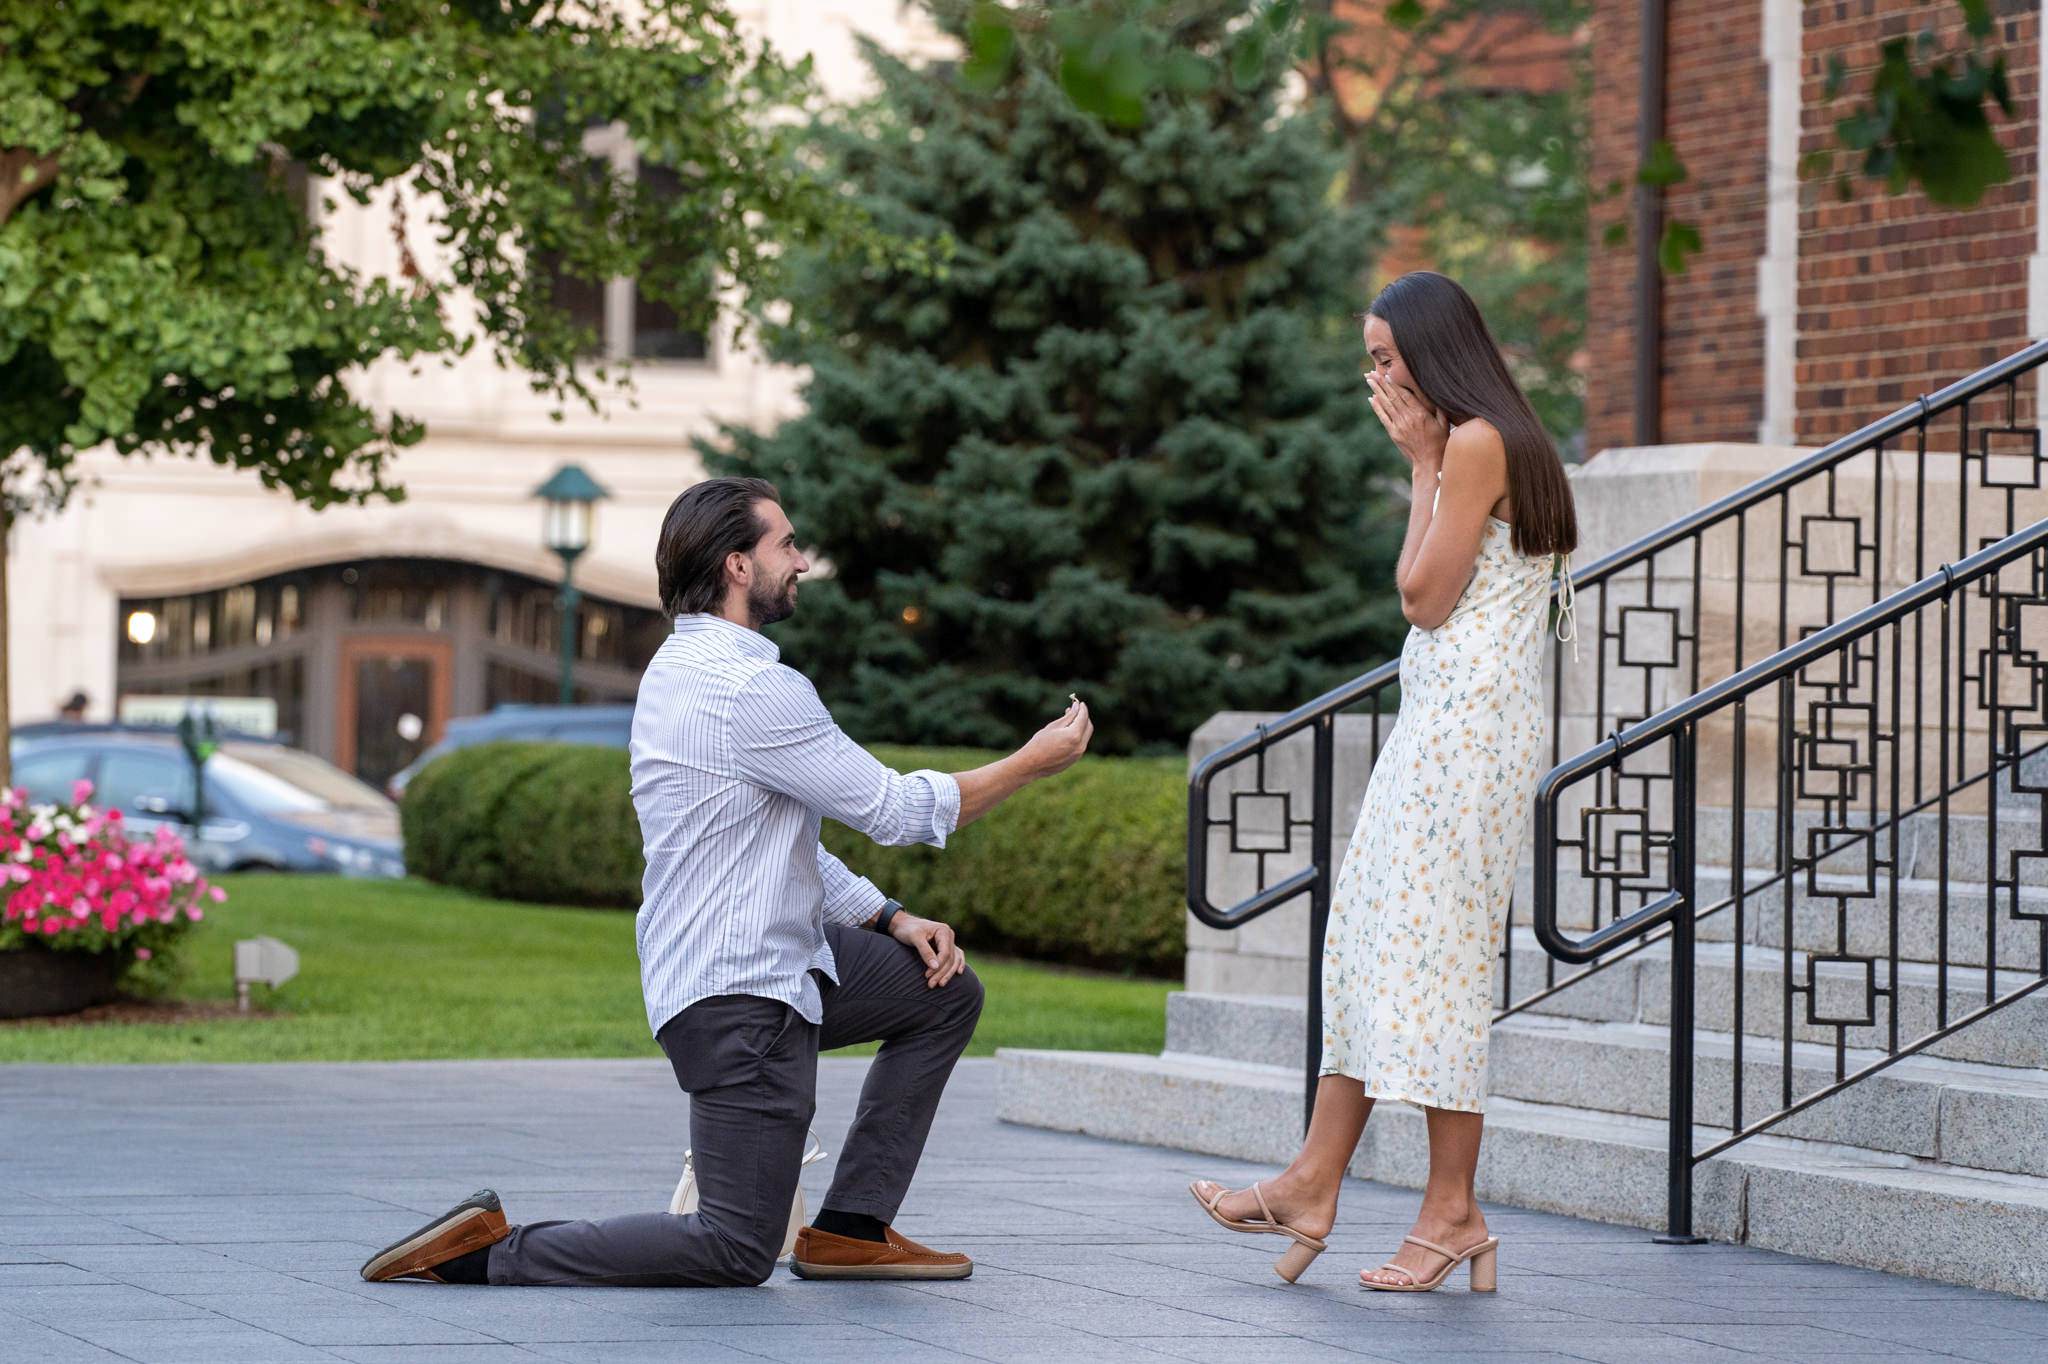 man takes a knee and proposes in a downtown Birmingham proposal as his fiance covers her mouth in excitement